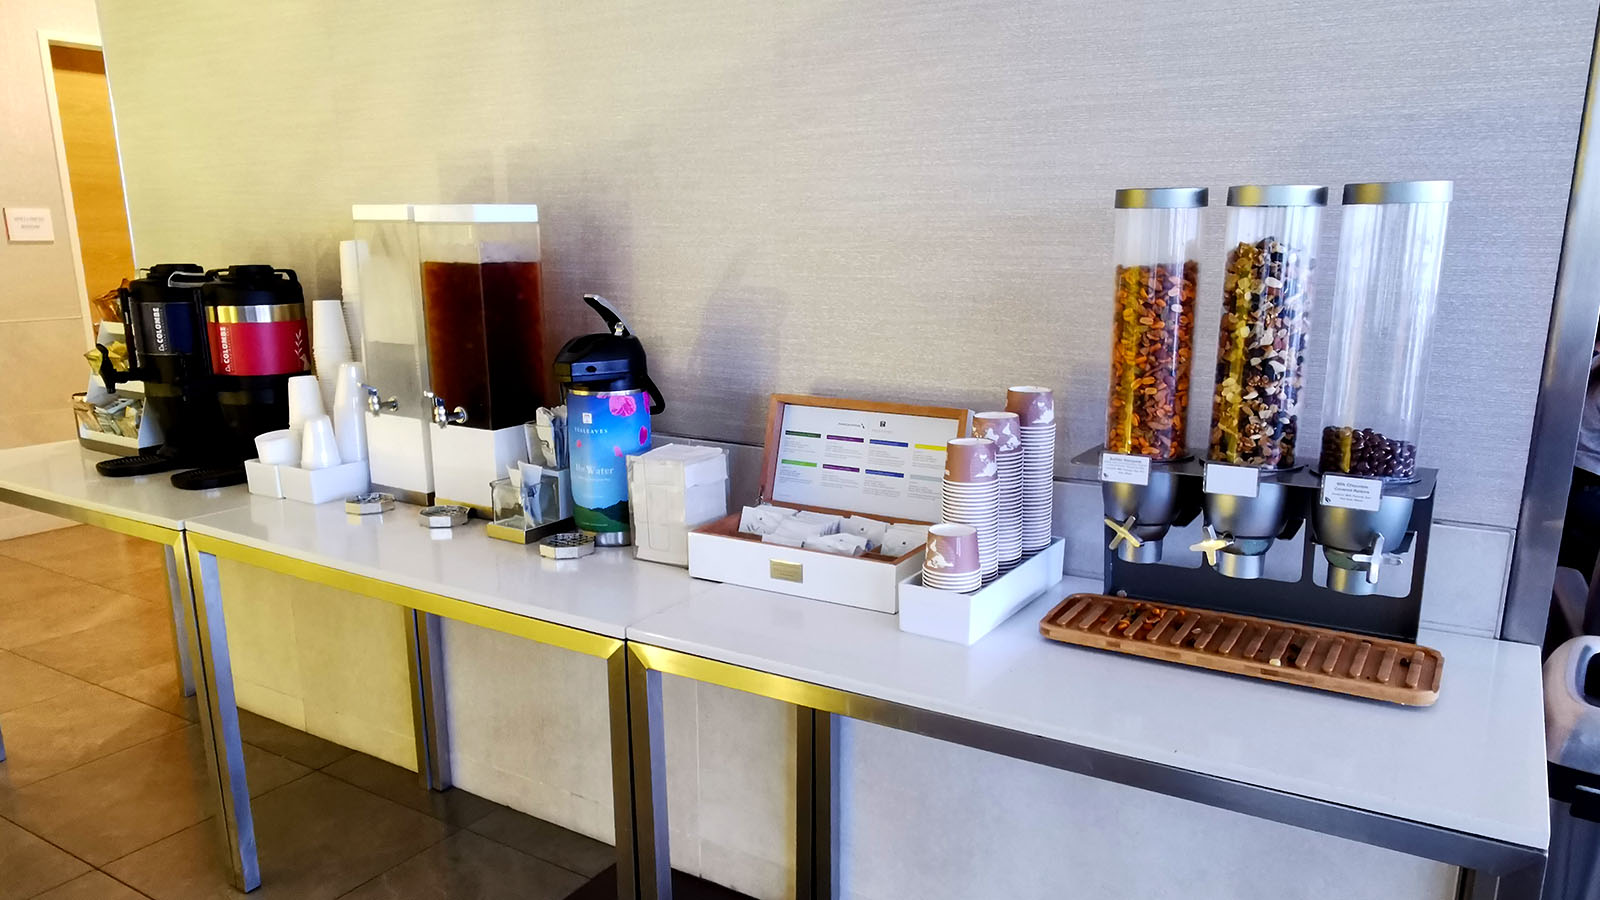 Breakfast in the American Airlines Admirals Club, Los Angeles